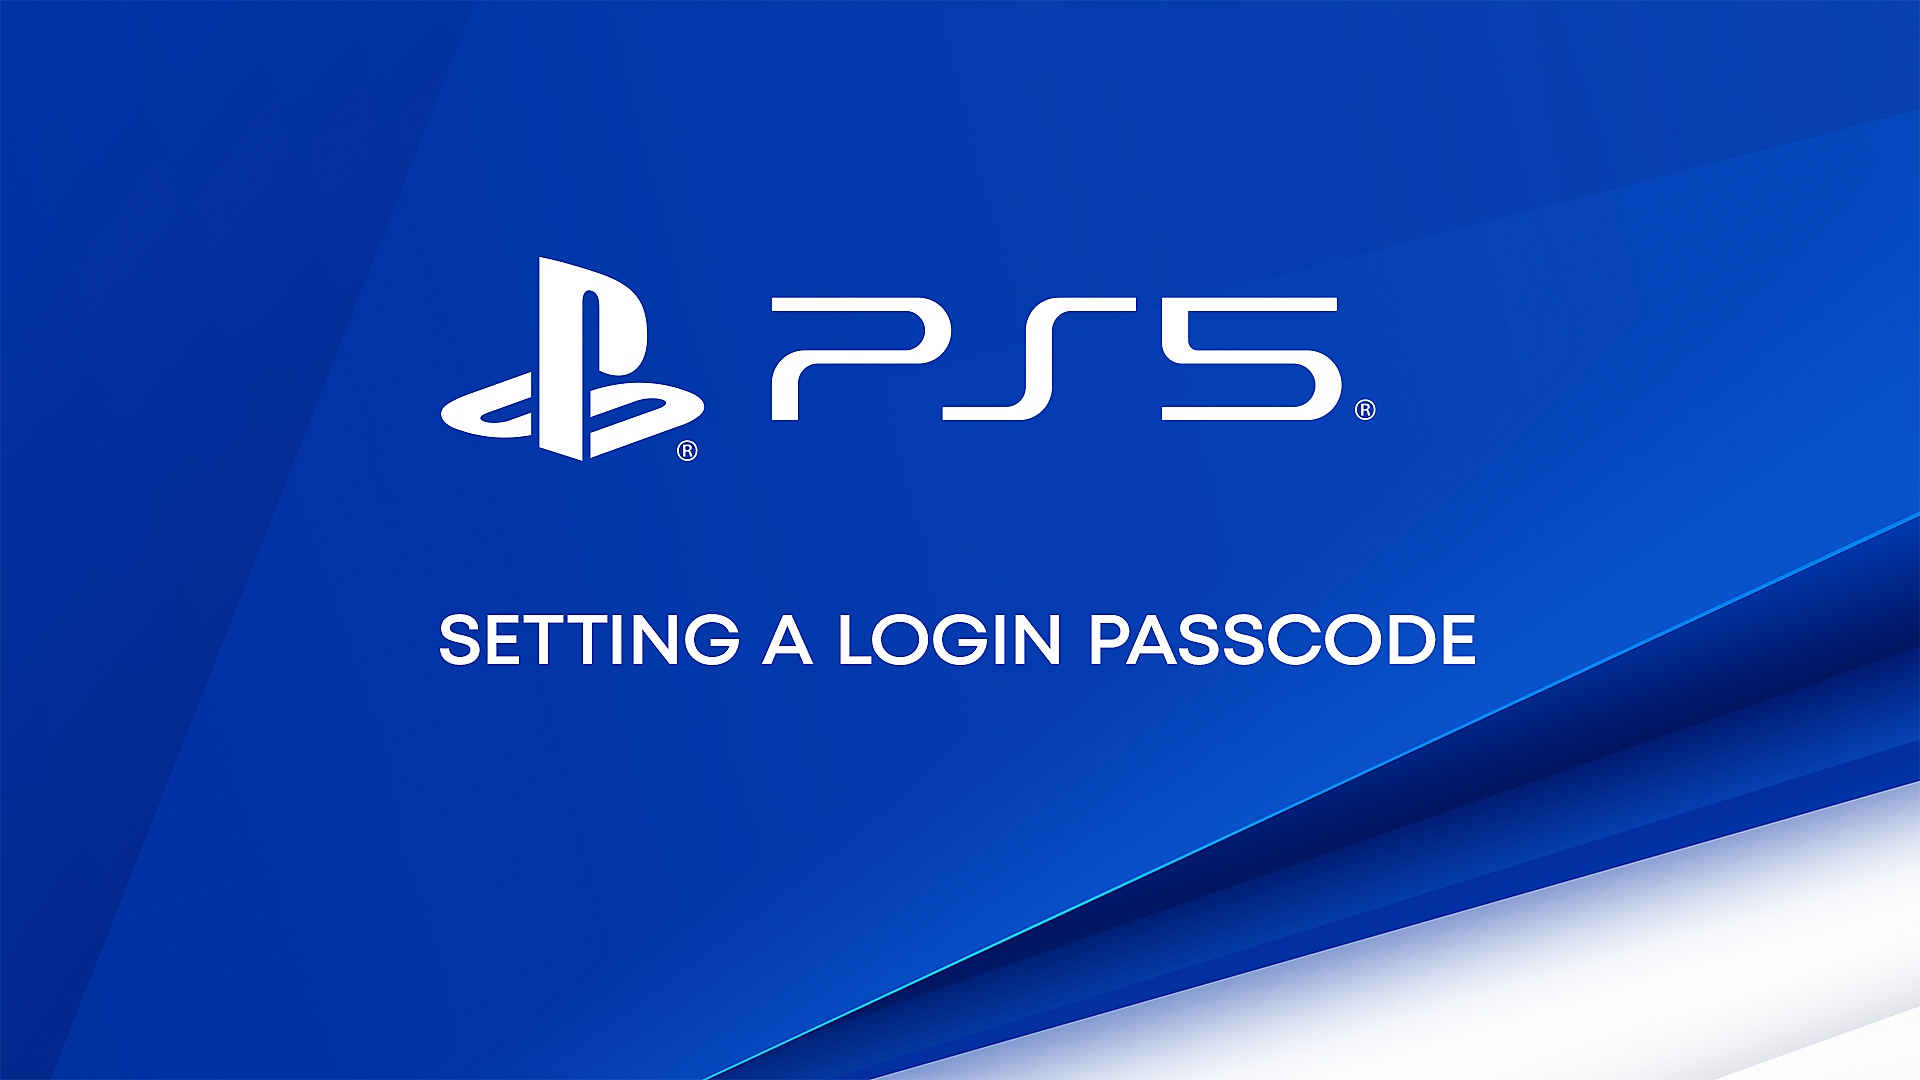 Video showing how to set a login passcode on PS5